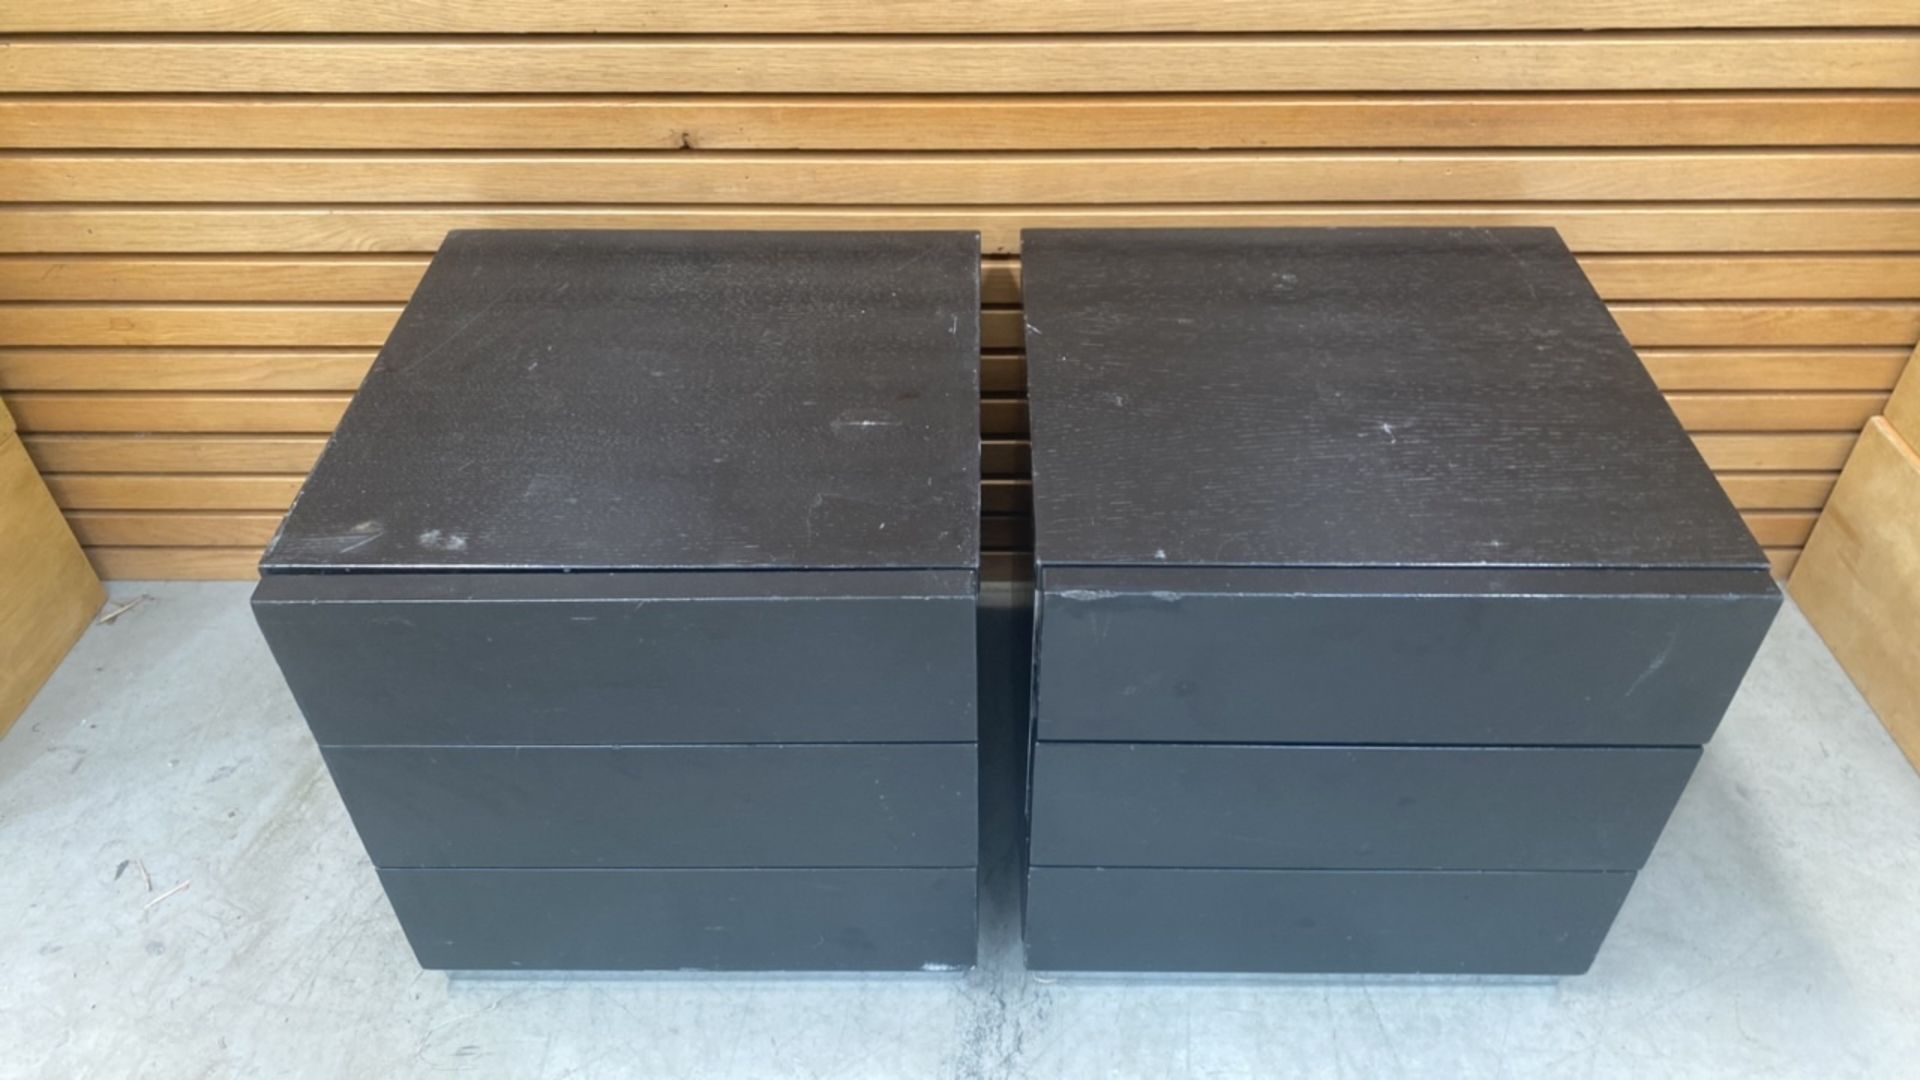 Black Wooden Side Table With 2 Draws X2 - Image 2 of 3